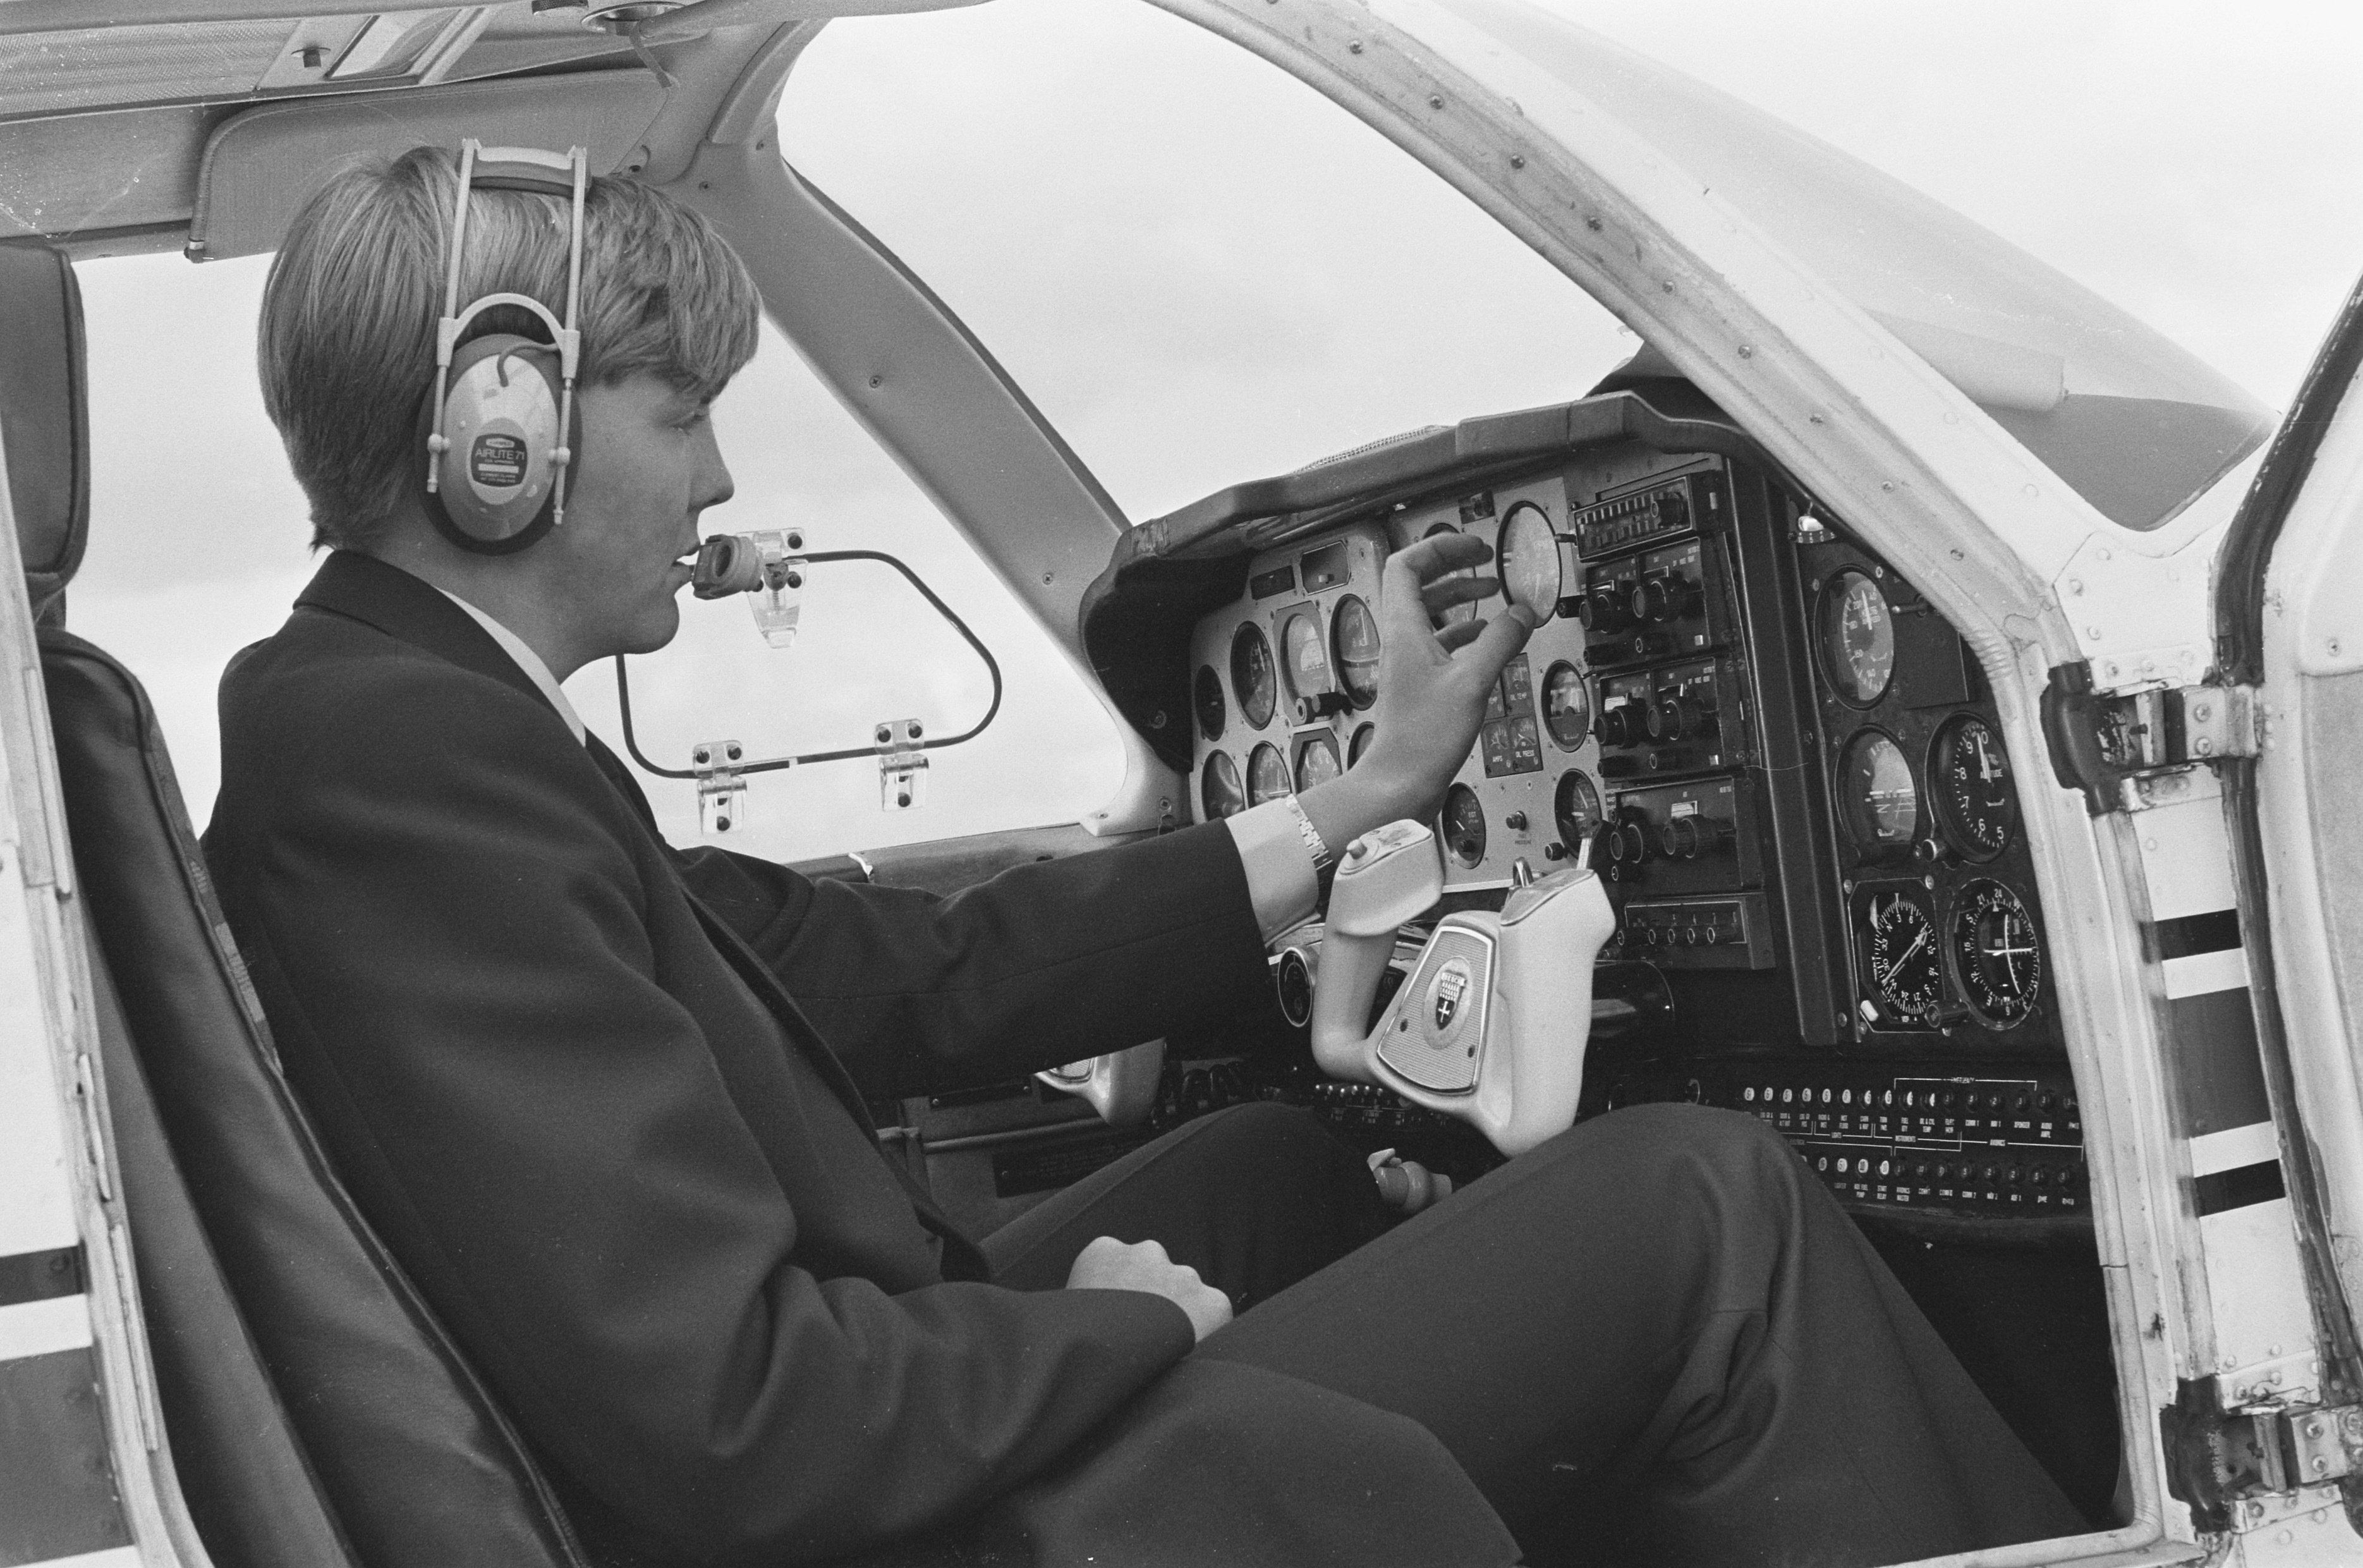 Prince Willem Alexander in the cockpit of the Beeckcraft Bonanza that he flew during his first practical lesson at the National Aviation School in Eelde Date: March 19, 1987